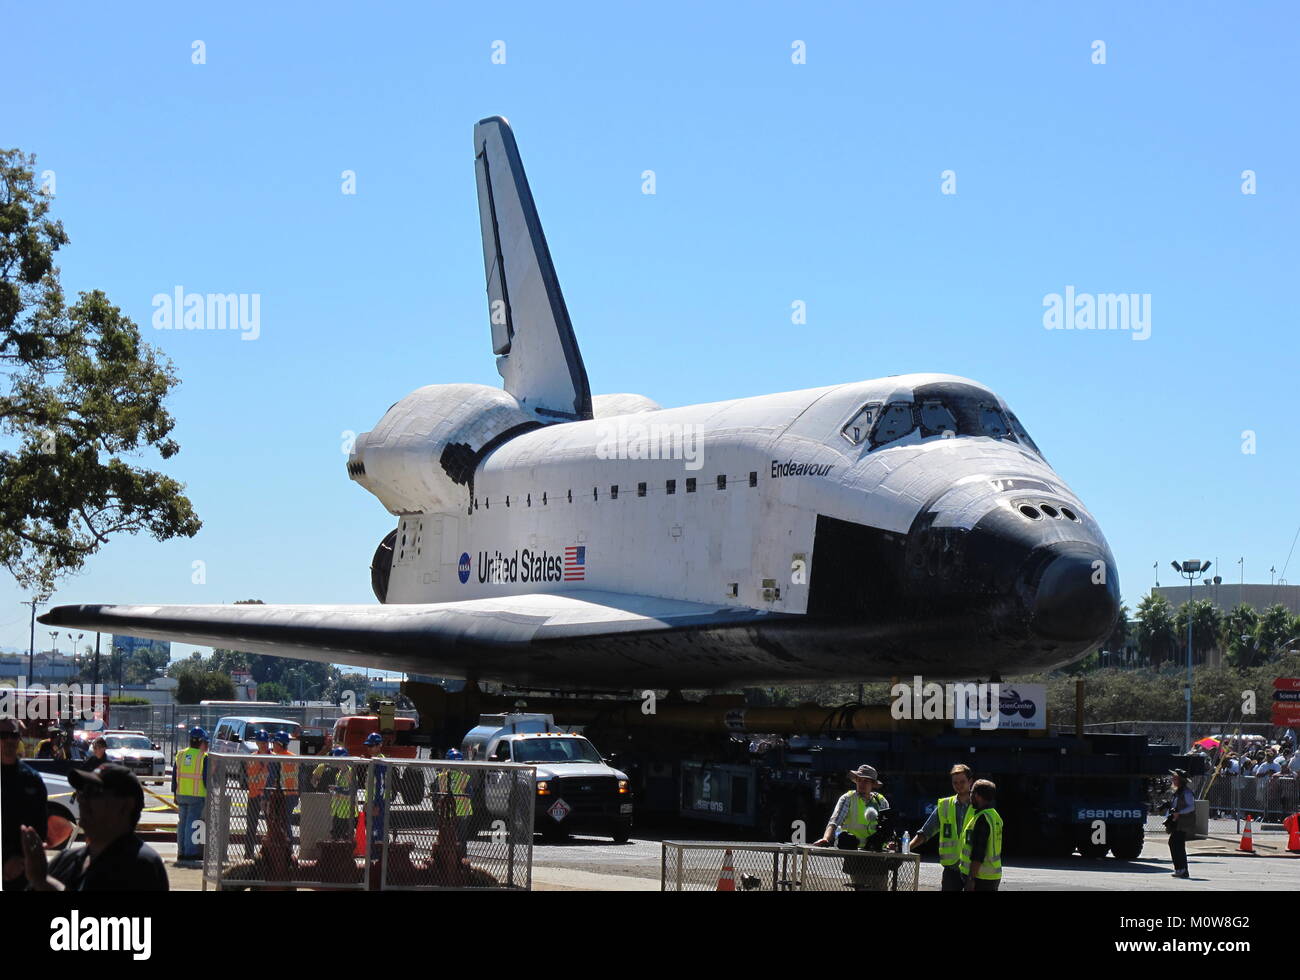 Los Angeles, CA - Oct. 13, 2012: NASA's Endeavour space shuttle is on display during the retirement parade for the spacecraft, first launched in 1992. Stock Photo